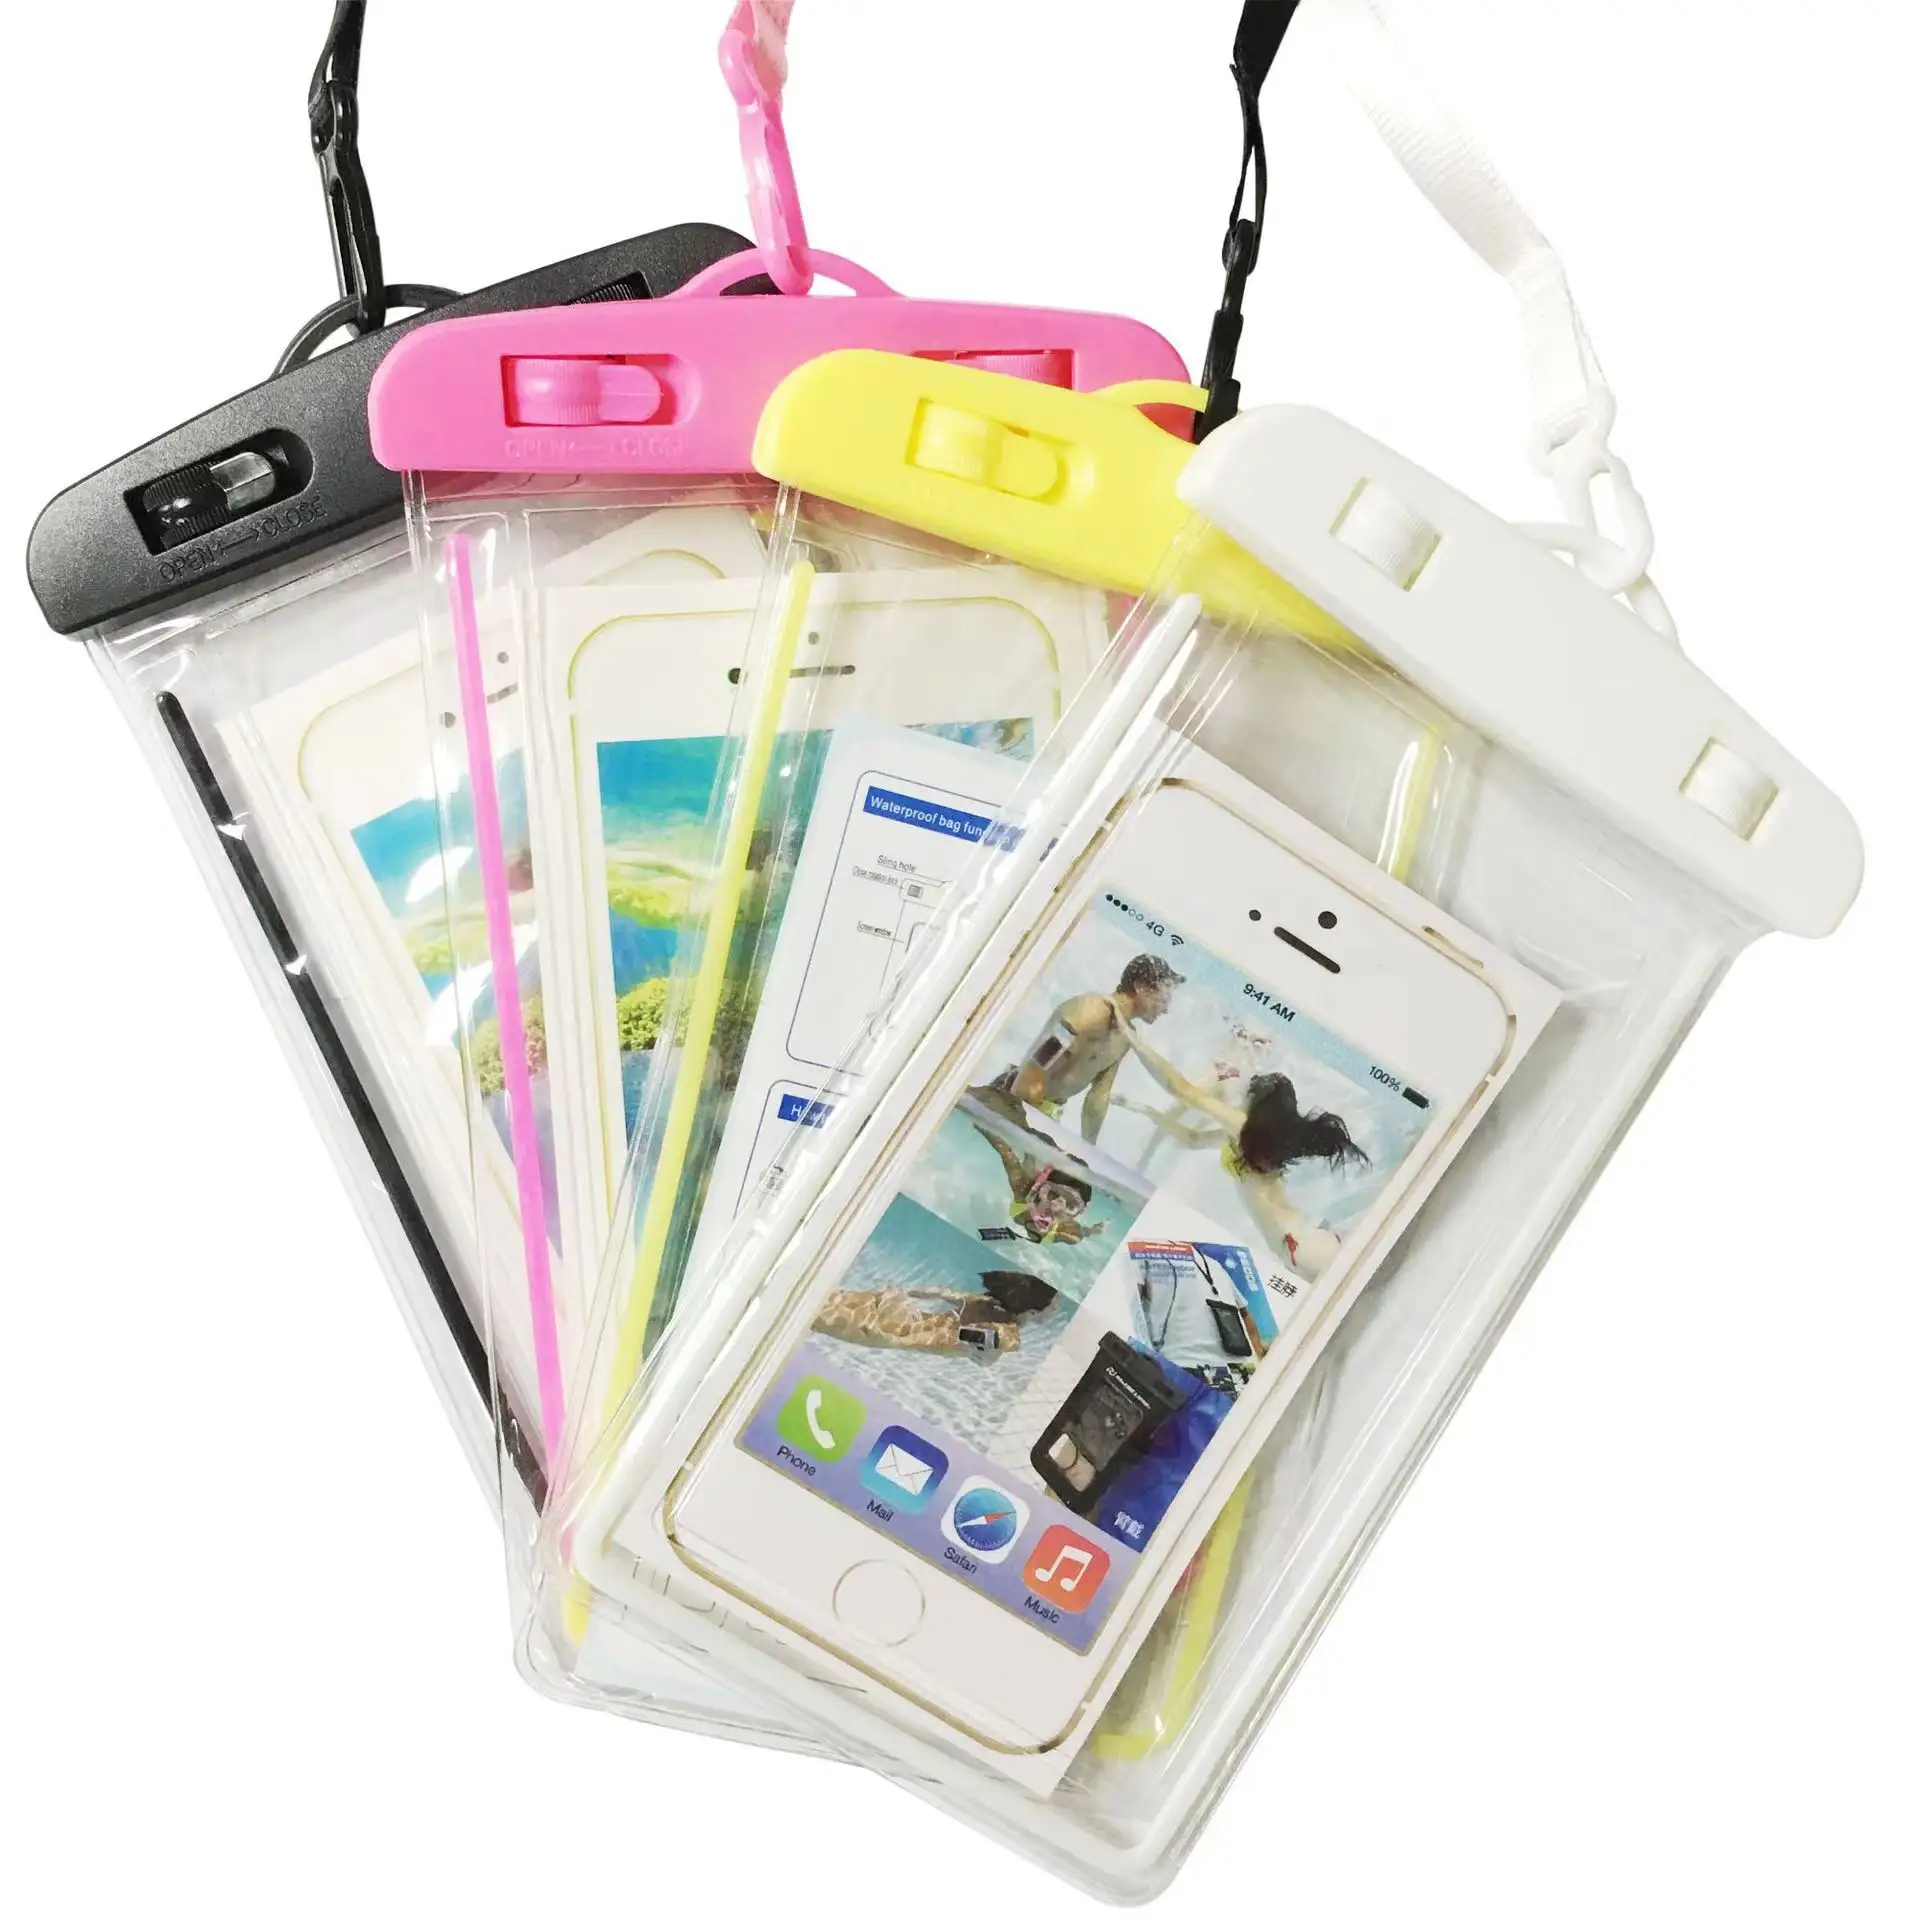 Universal Waterproof PVC Mobile Phone Cases Clear Pouch Waterproof Bag Water Proof Cell Phone Bag with Lanyard Sports for Iphone